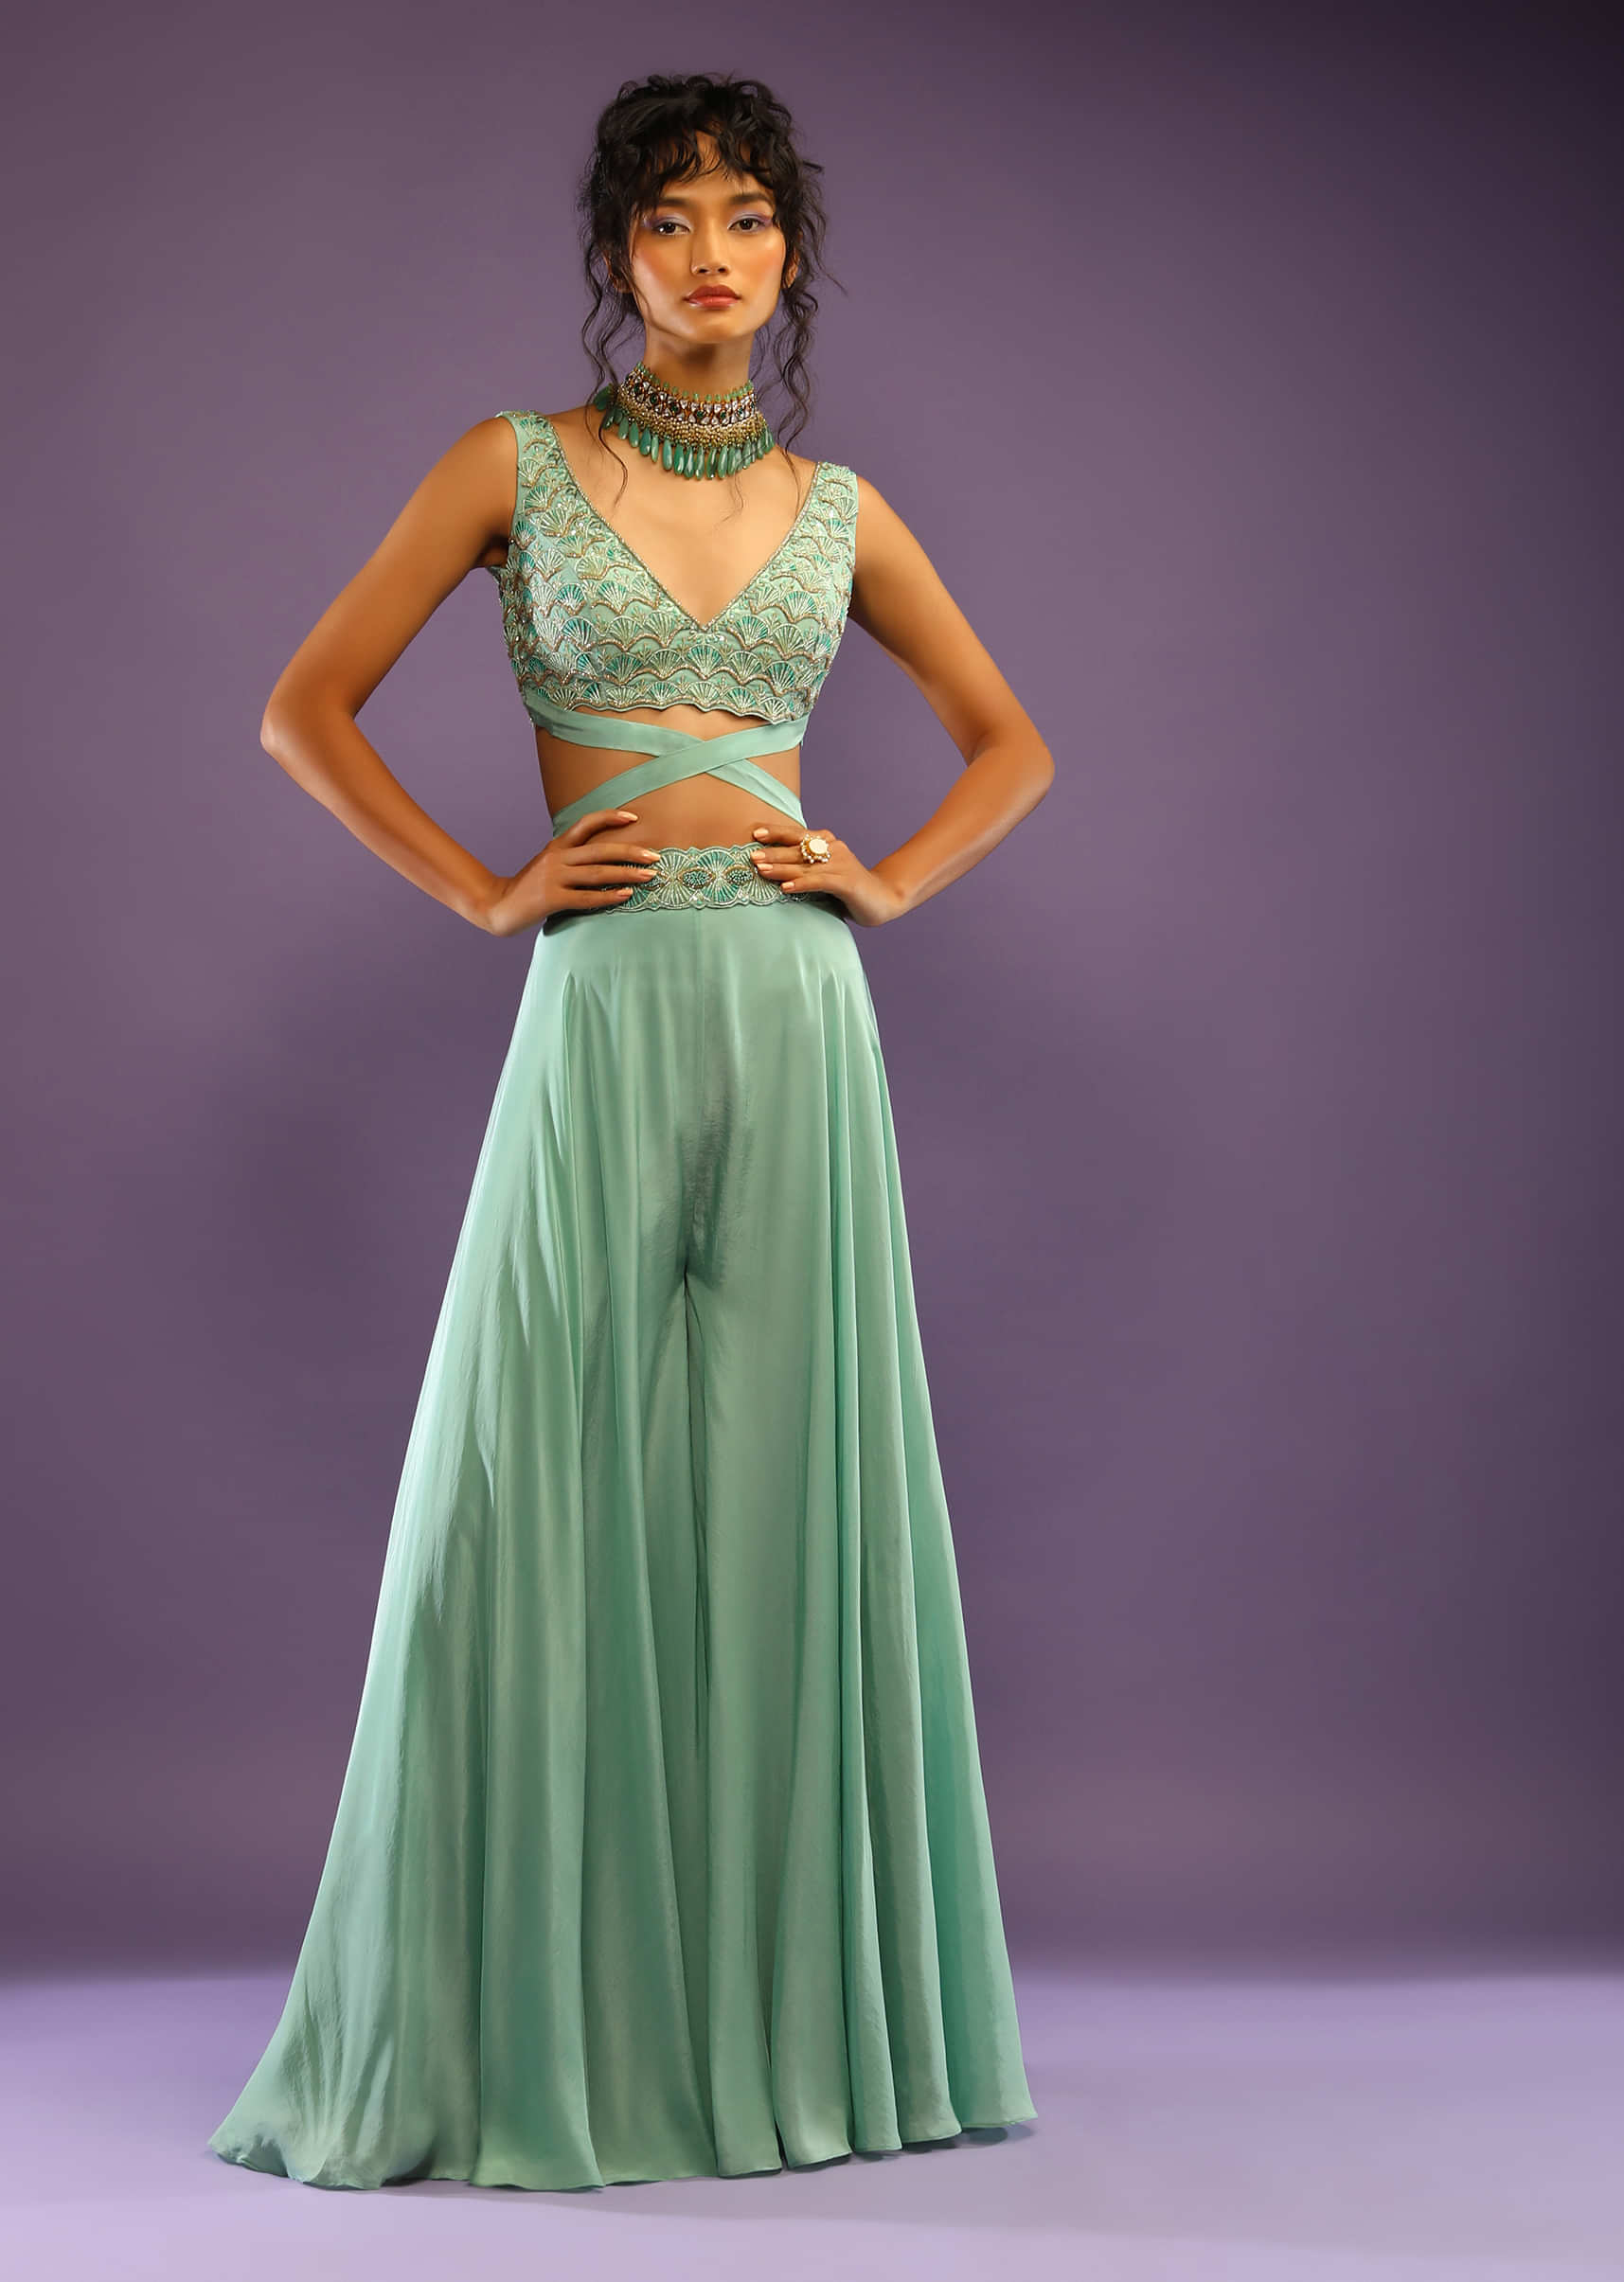 Sea Green Palazzo And Crop Top With Wrap Around Straps And Shaded Green Bead Work In Scallop Motifs